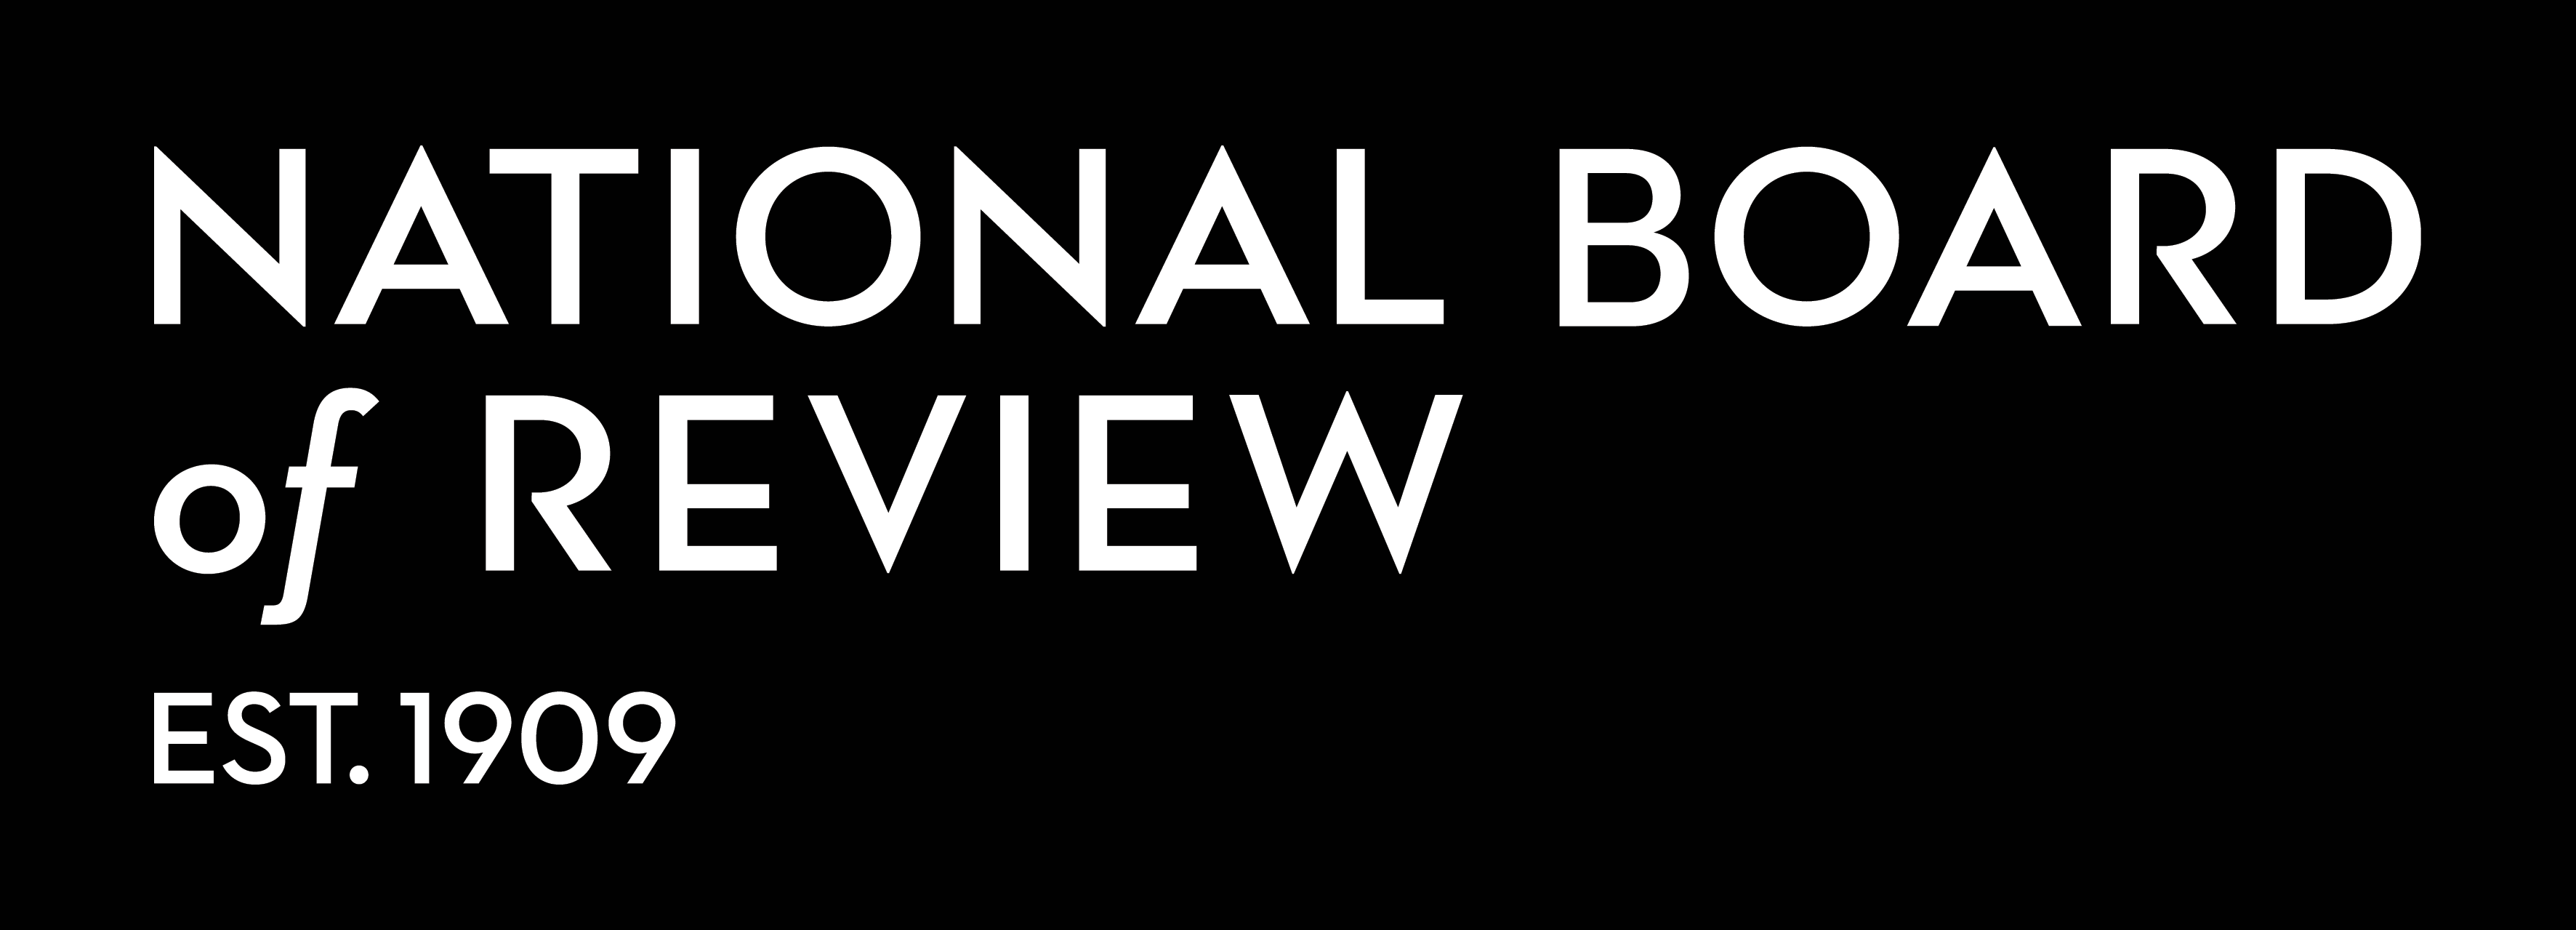 The_National_Board_of_Review_Logo